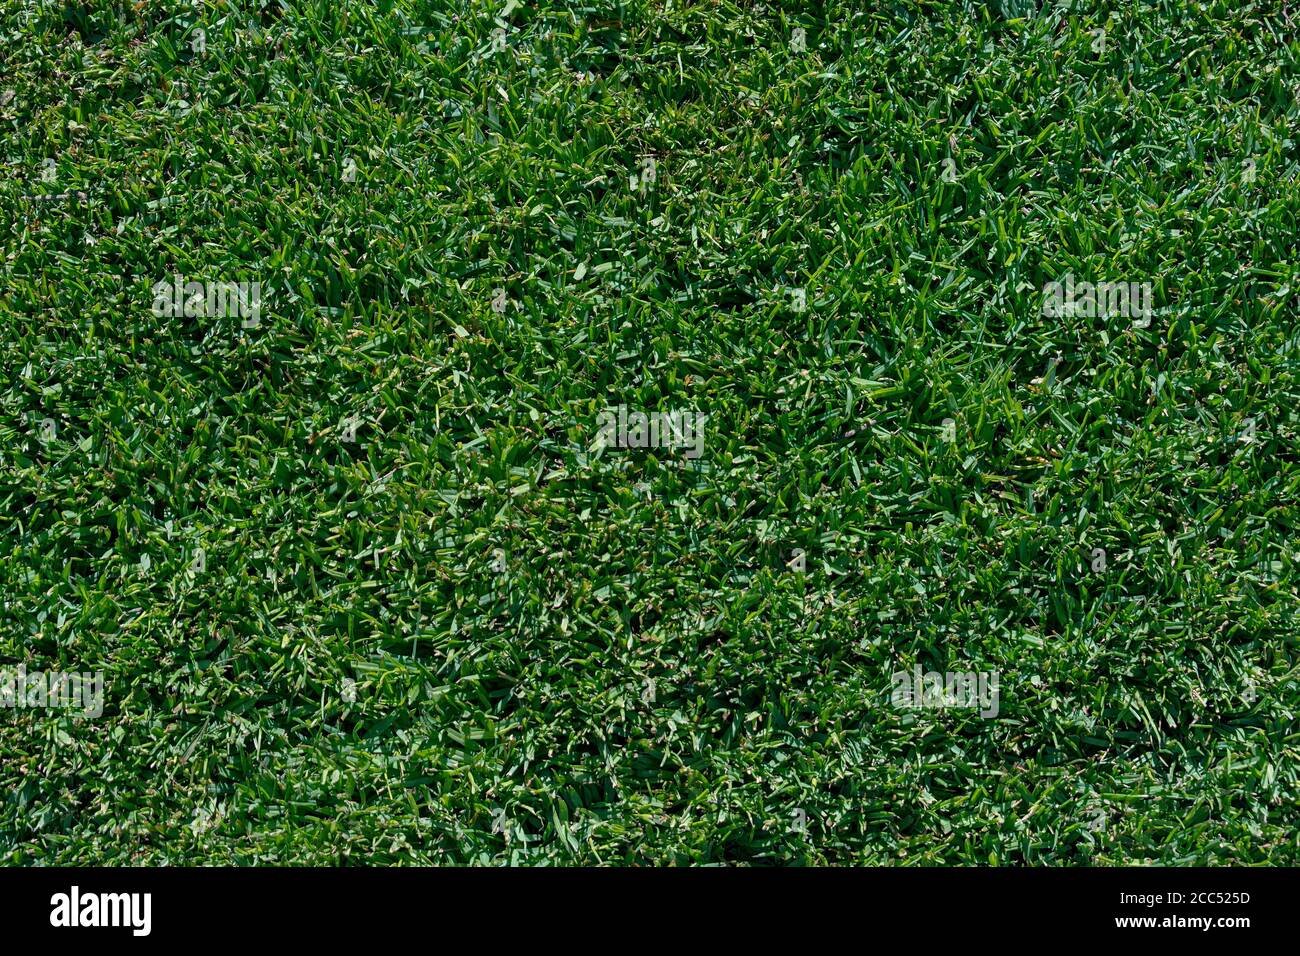 closeup of a section of a lush emerald green lawn of dwarf st augustine grass showing the dense pattern and texture of a healthy lawn Stock Photo